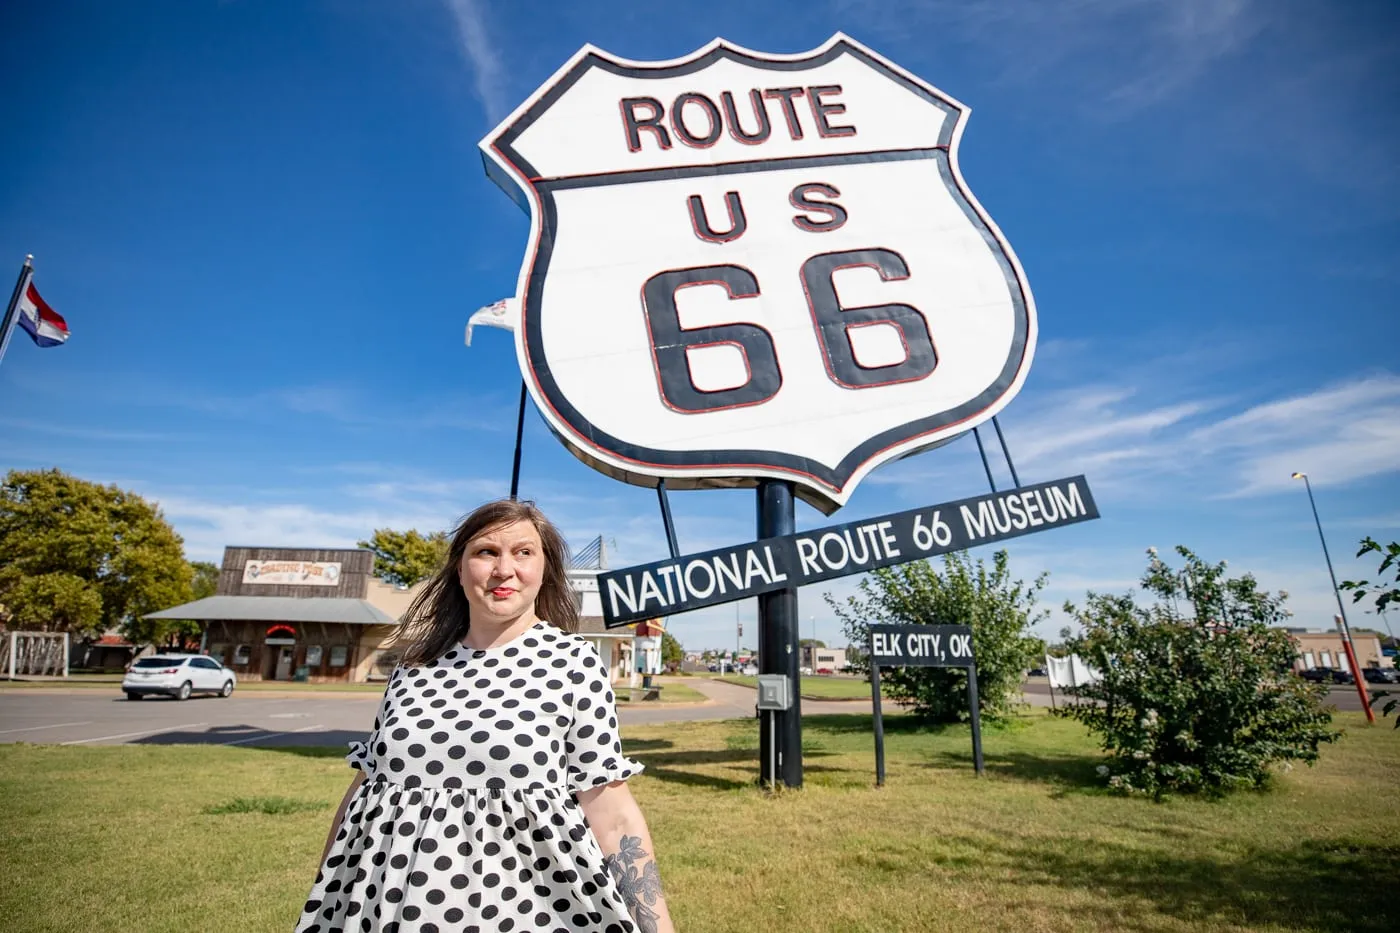 Giant Route 66 Sign at the National Route 66 Museum in Elk City, Oklahoma